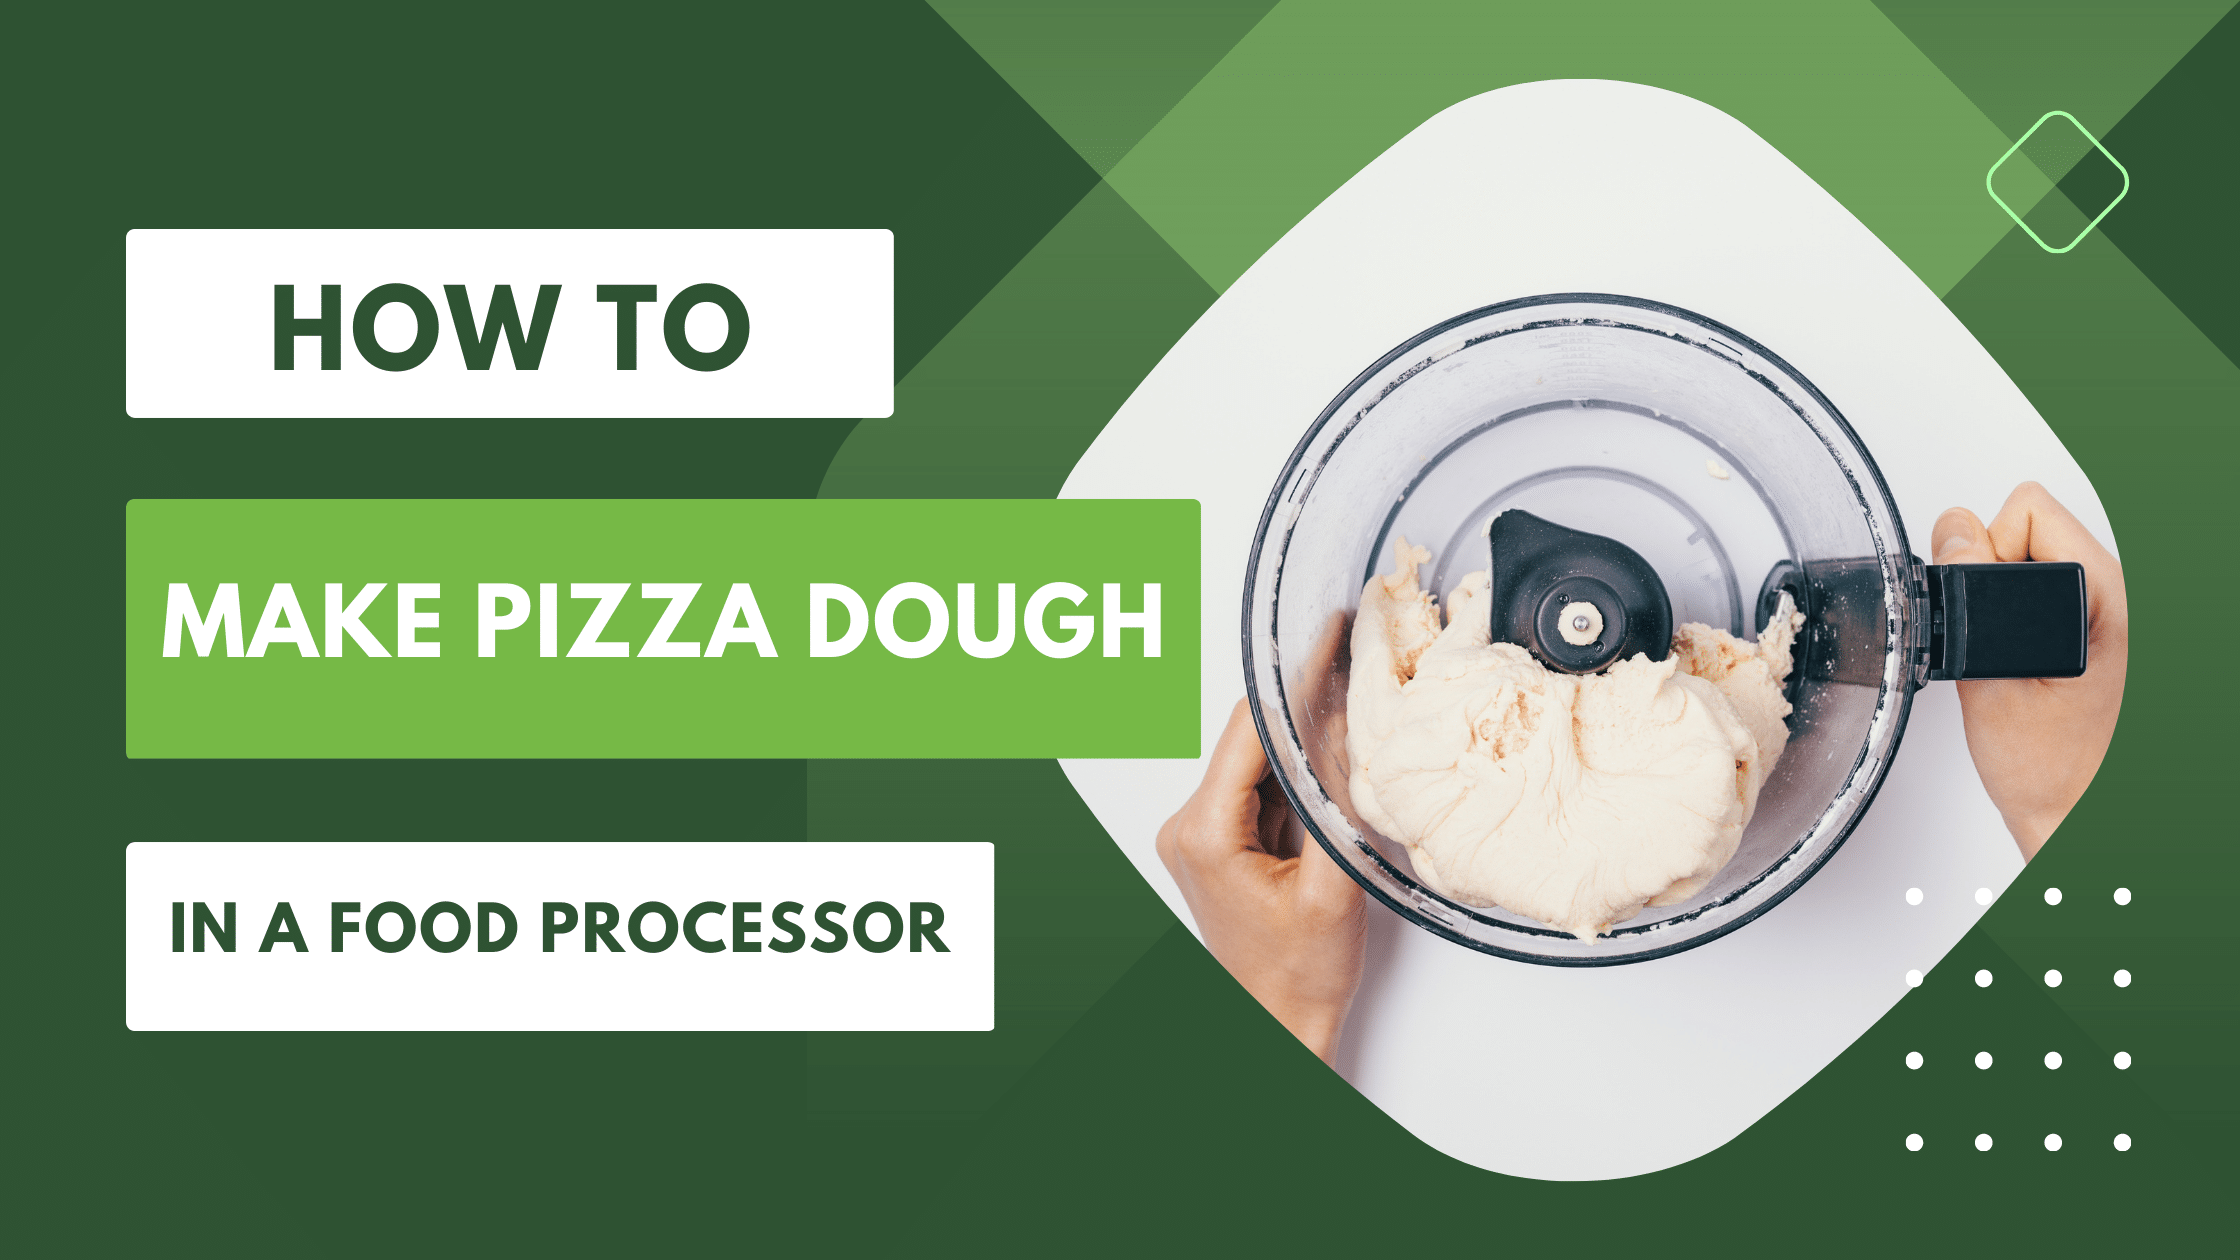 How to Make Pizza Dough in a Food Processor